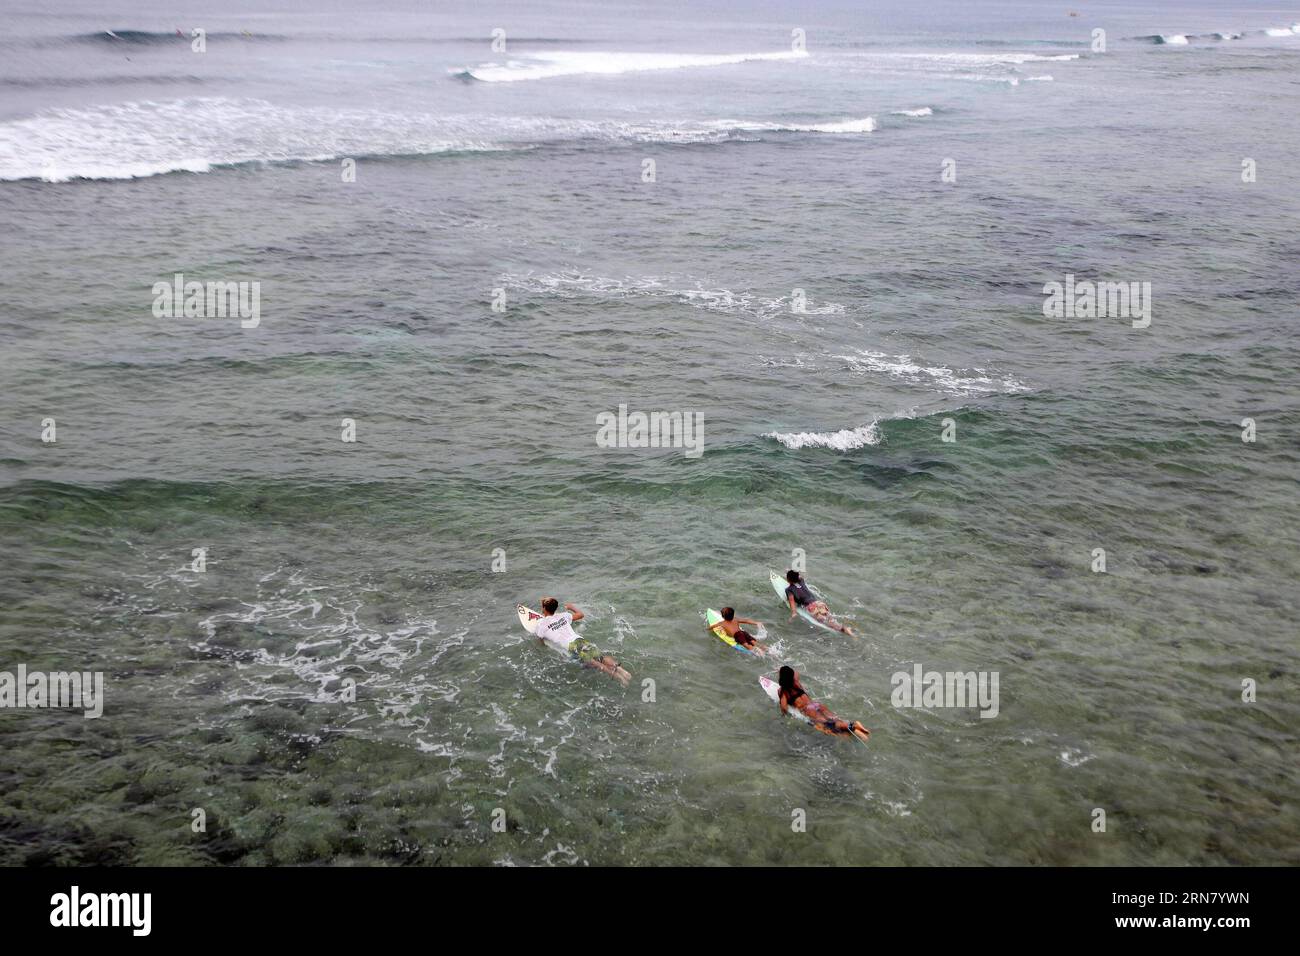 (150926) -- SIARGAO ISLAND, Sept. 26, 2015 -- Tourists surf in Siargao Island, the Philippines, Sept. 26, 2015. The presidential palace Malacanang said Friday that the Philippines is still generally safe after travel advisories were issued by foreign countries following last Monday s kidnapping at an island-resort in Davao del Norte. )(bxq) PHILIPPINES-SIARGAO ISLAND-TOURISM RouellexUmali PUBLICATIONxNOTxINxCHN   Iceland Sept 26 2015 tourists Surf in  Iceland The Philippines Sept 26 2015 The Presidential Palace Malacanang Said Friday Thatcher The Philippines IS quiet Generally Safe After Trave Stock Photo